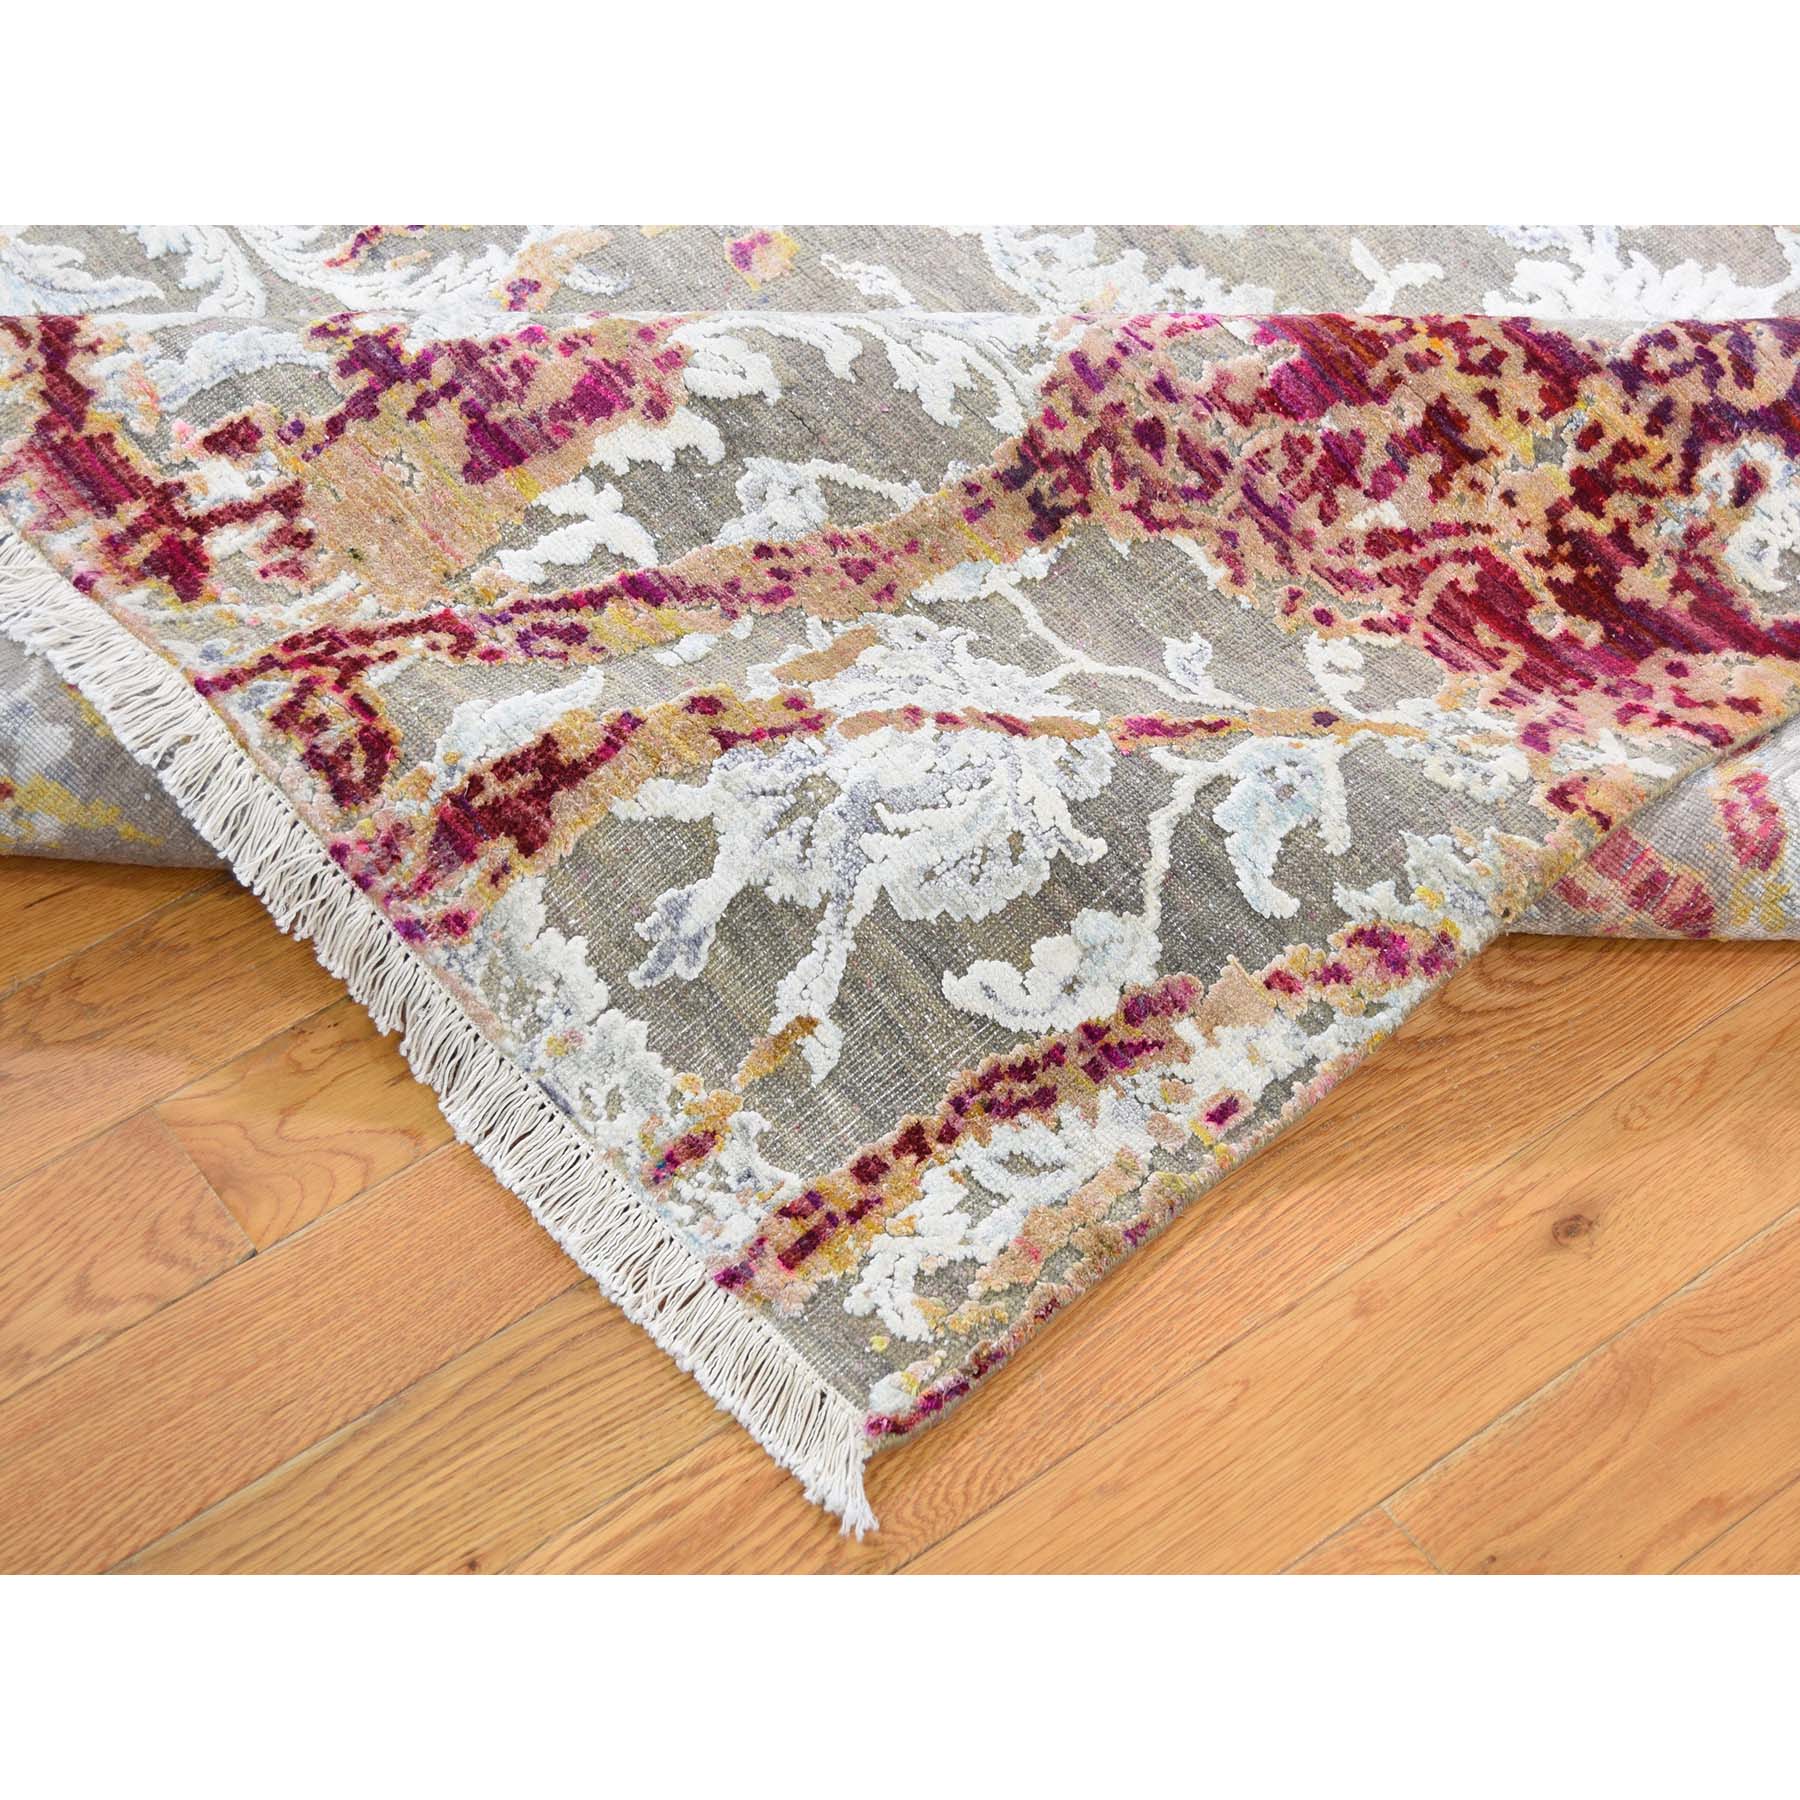 9-10 x13-2  Hand-Knotted Sari Silk With Textured Wool Oriental Rug 